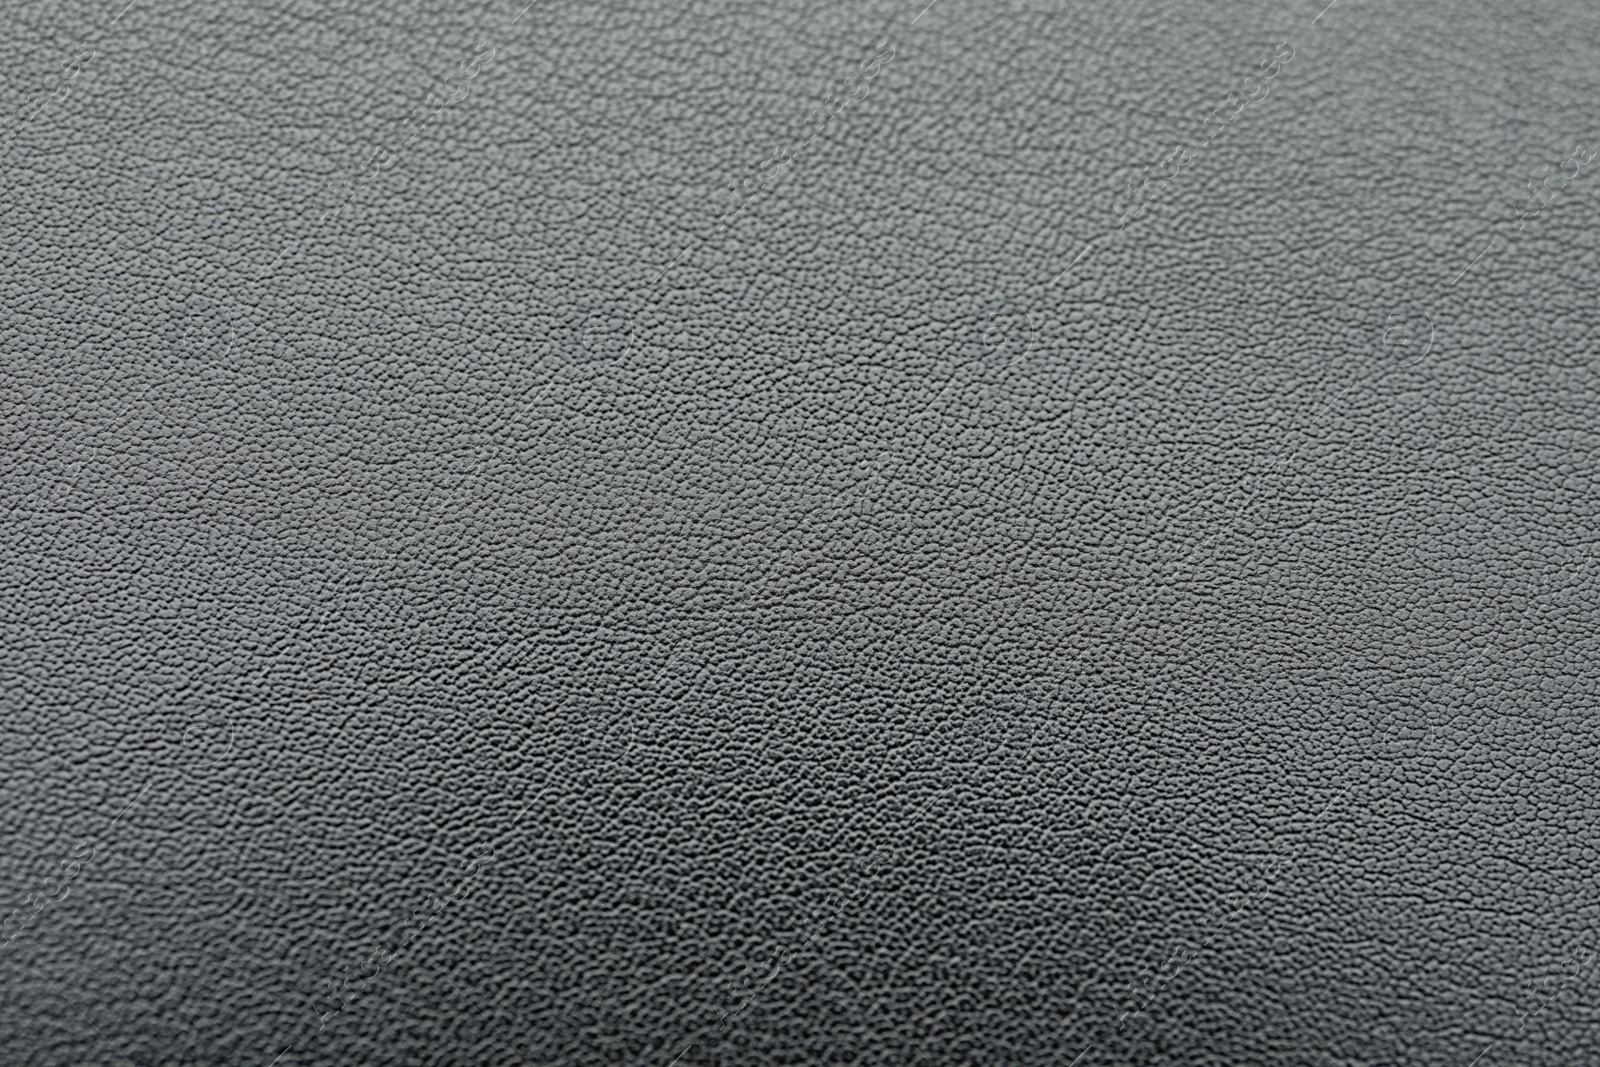 Photo of Texture of dark grey leather as background, closeup